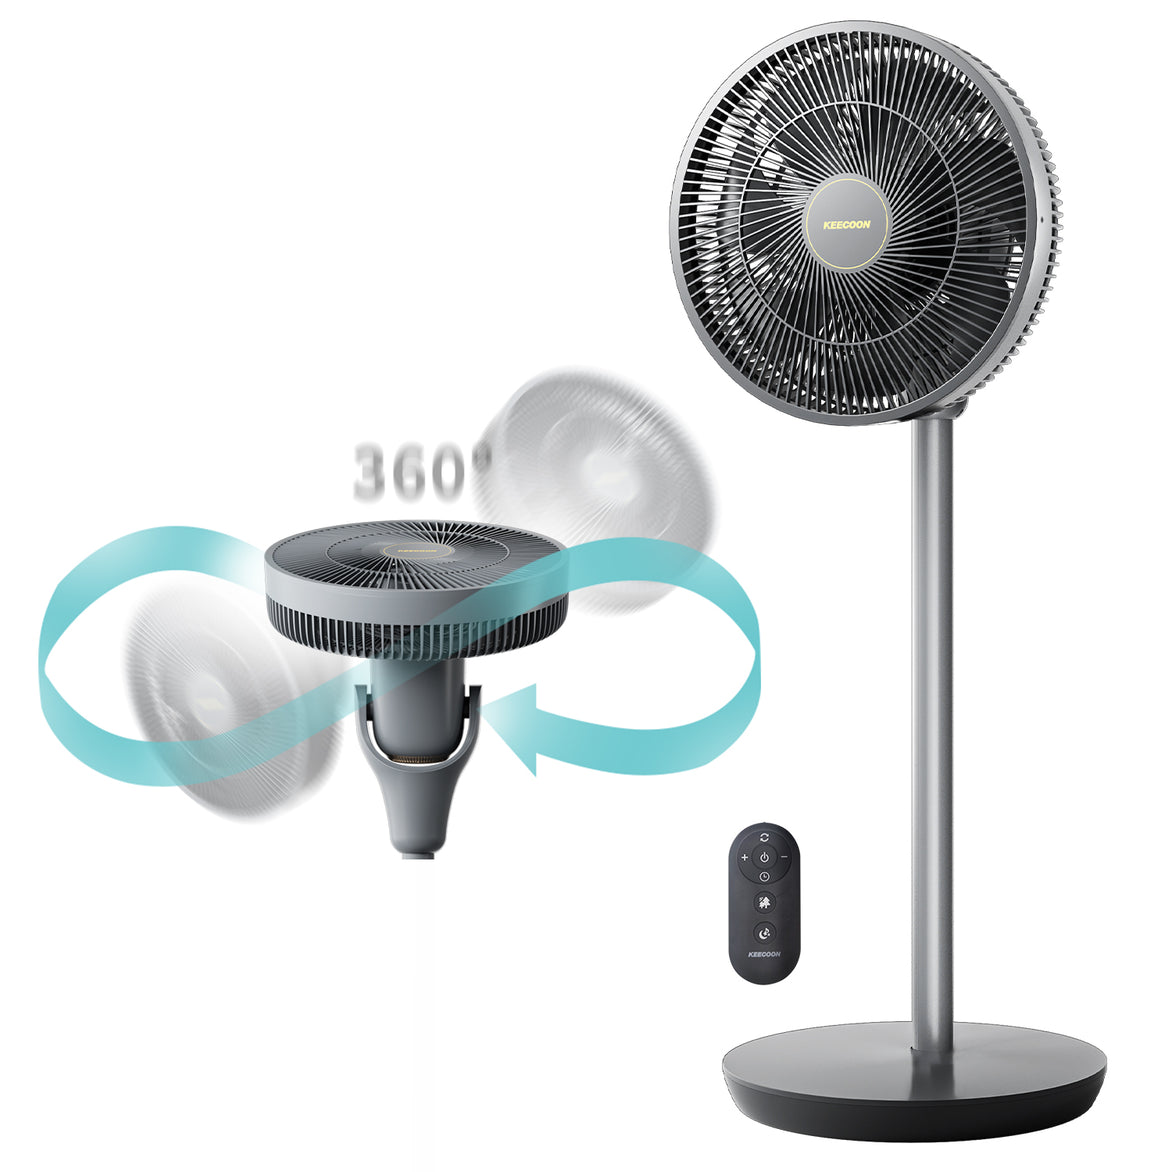 Standing Fan for Patios Home, 360 Degree Oscillating Rechargeable Pedestal Fan with Remote, 37-Inch Tall Cordless Whole House Style Portable Fan, Quiet,15000mAh Battery, 15 Speed Levels&Timer, Gray